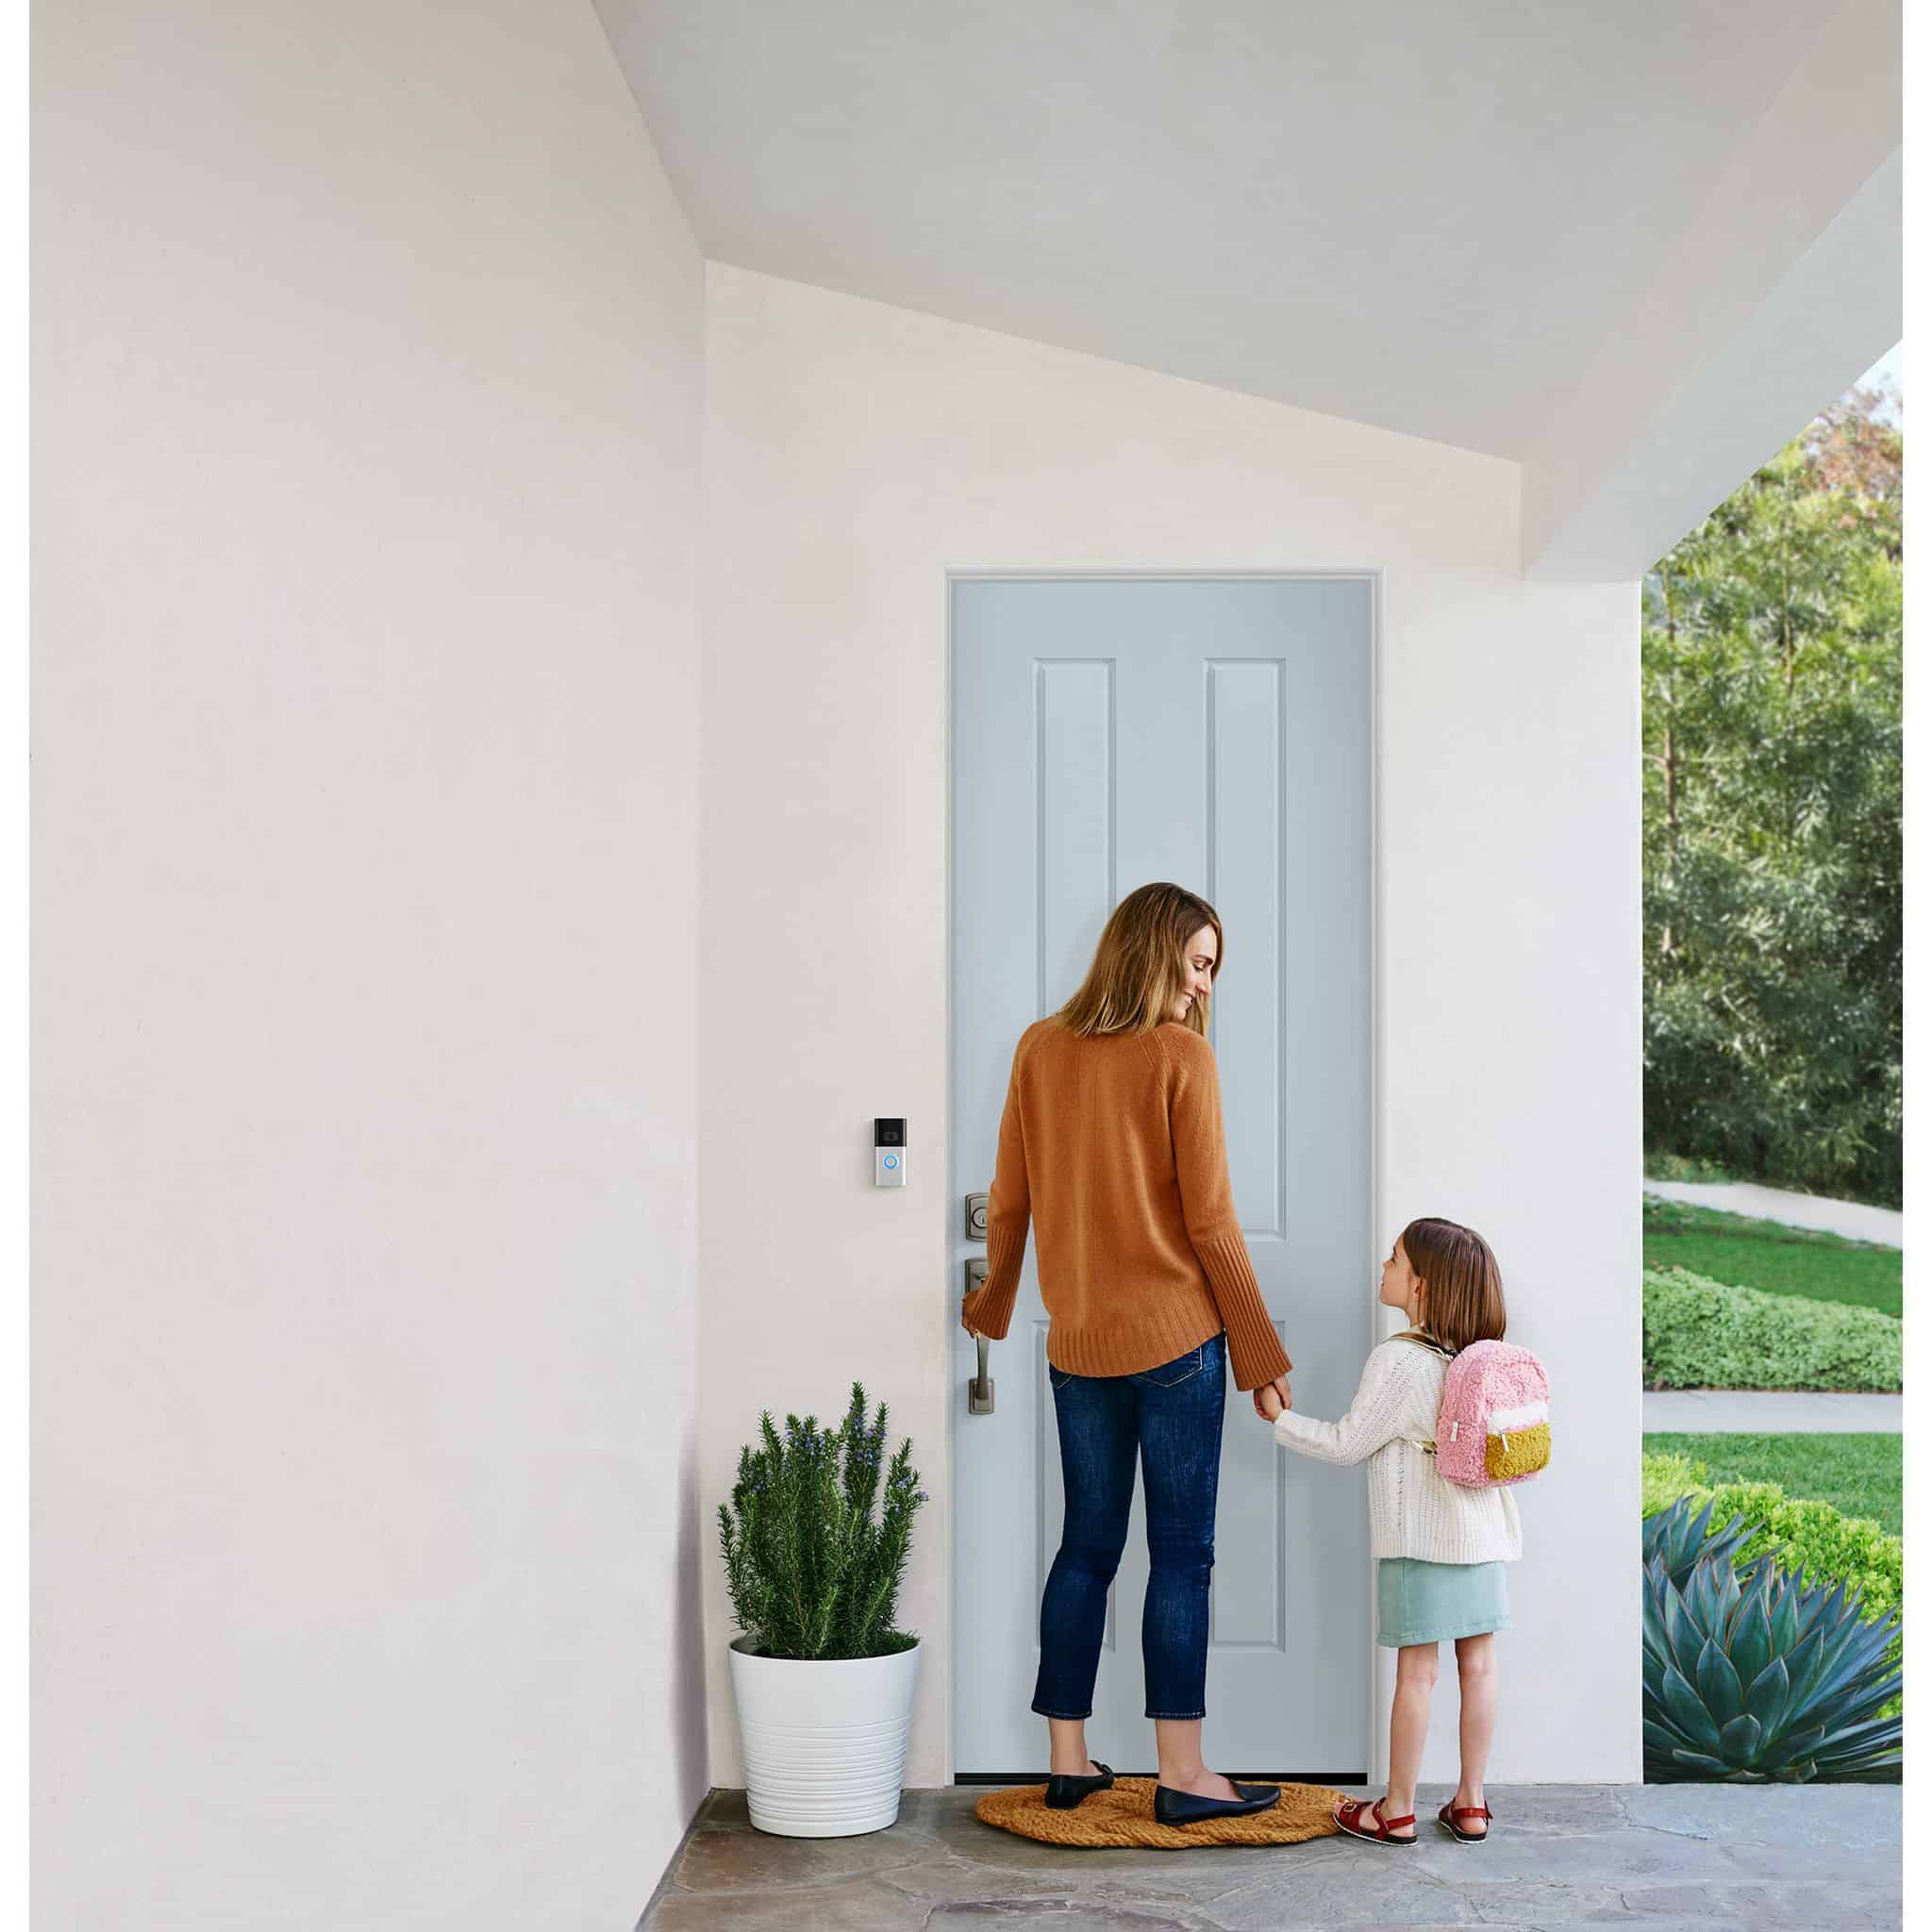 Ring Introduces Next-Generation Battery-Powered Video Doorbell